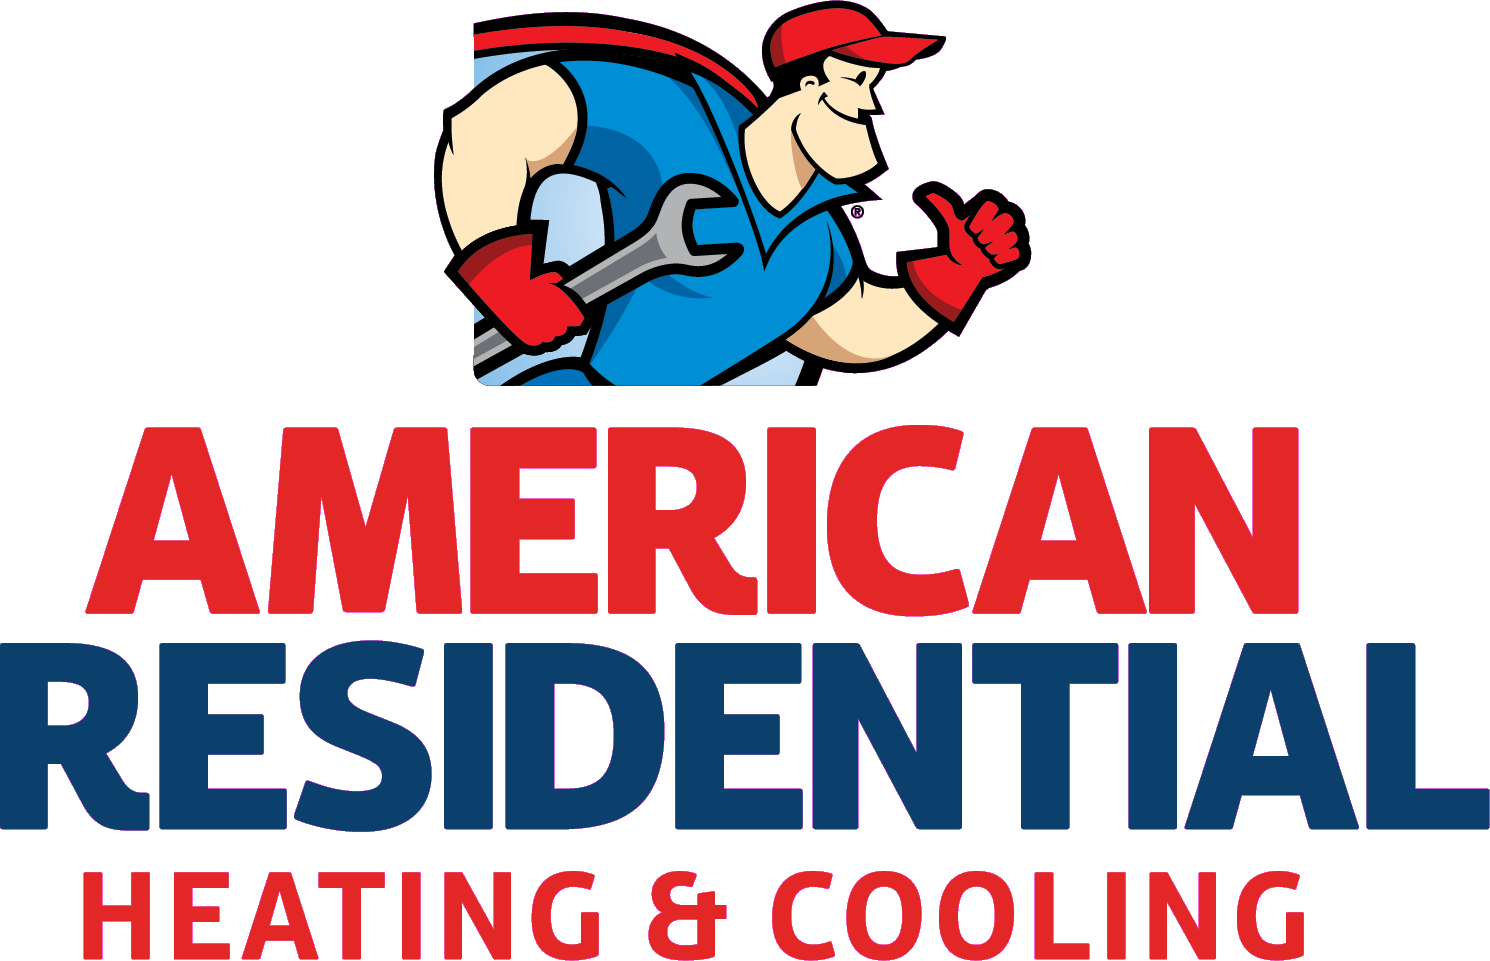 American Residential Heating & Cooling